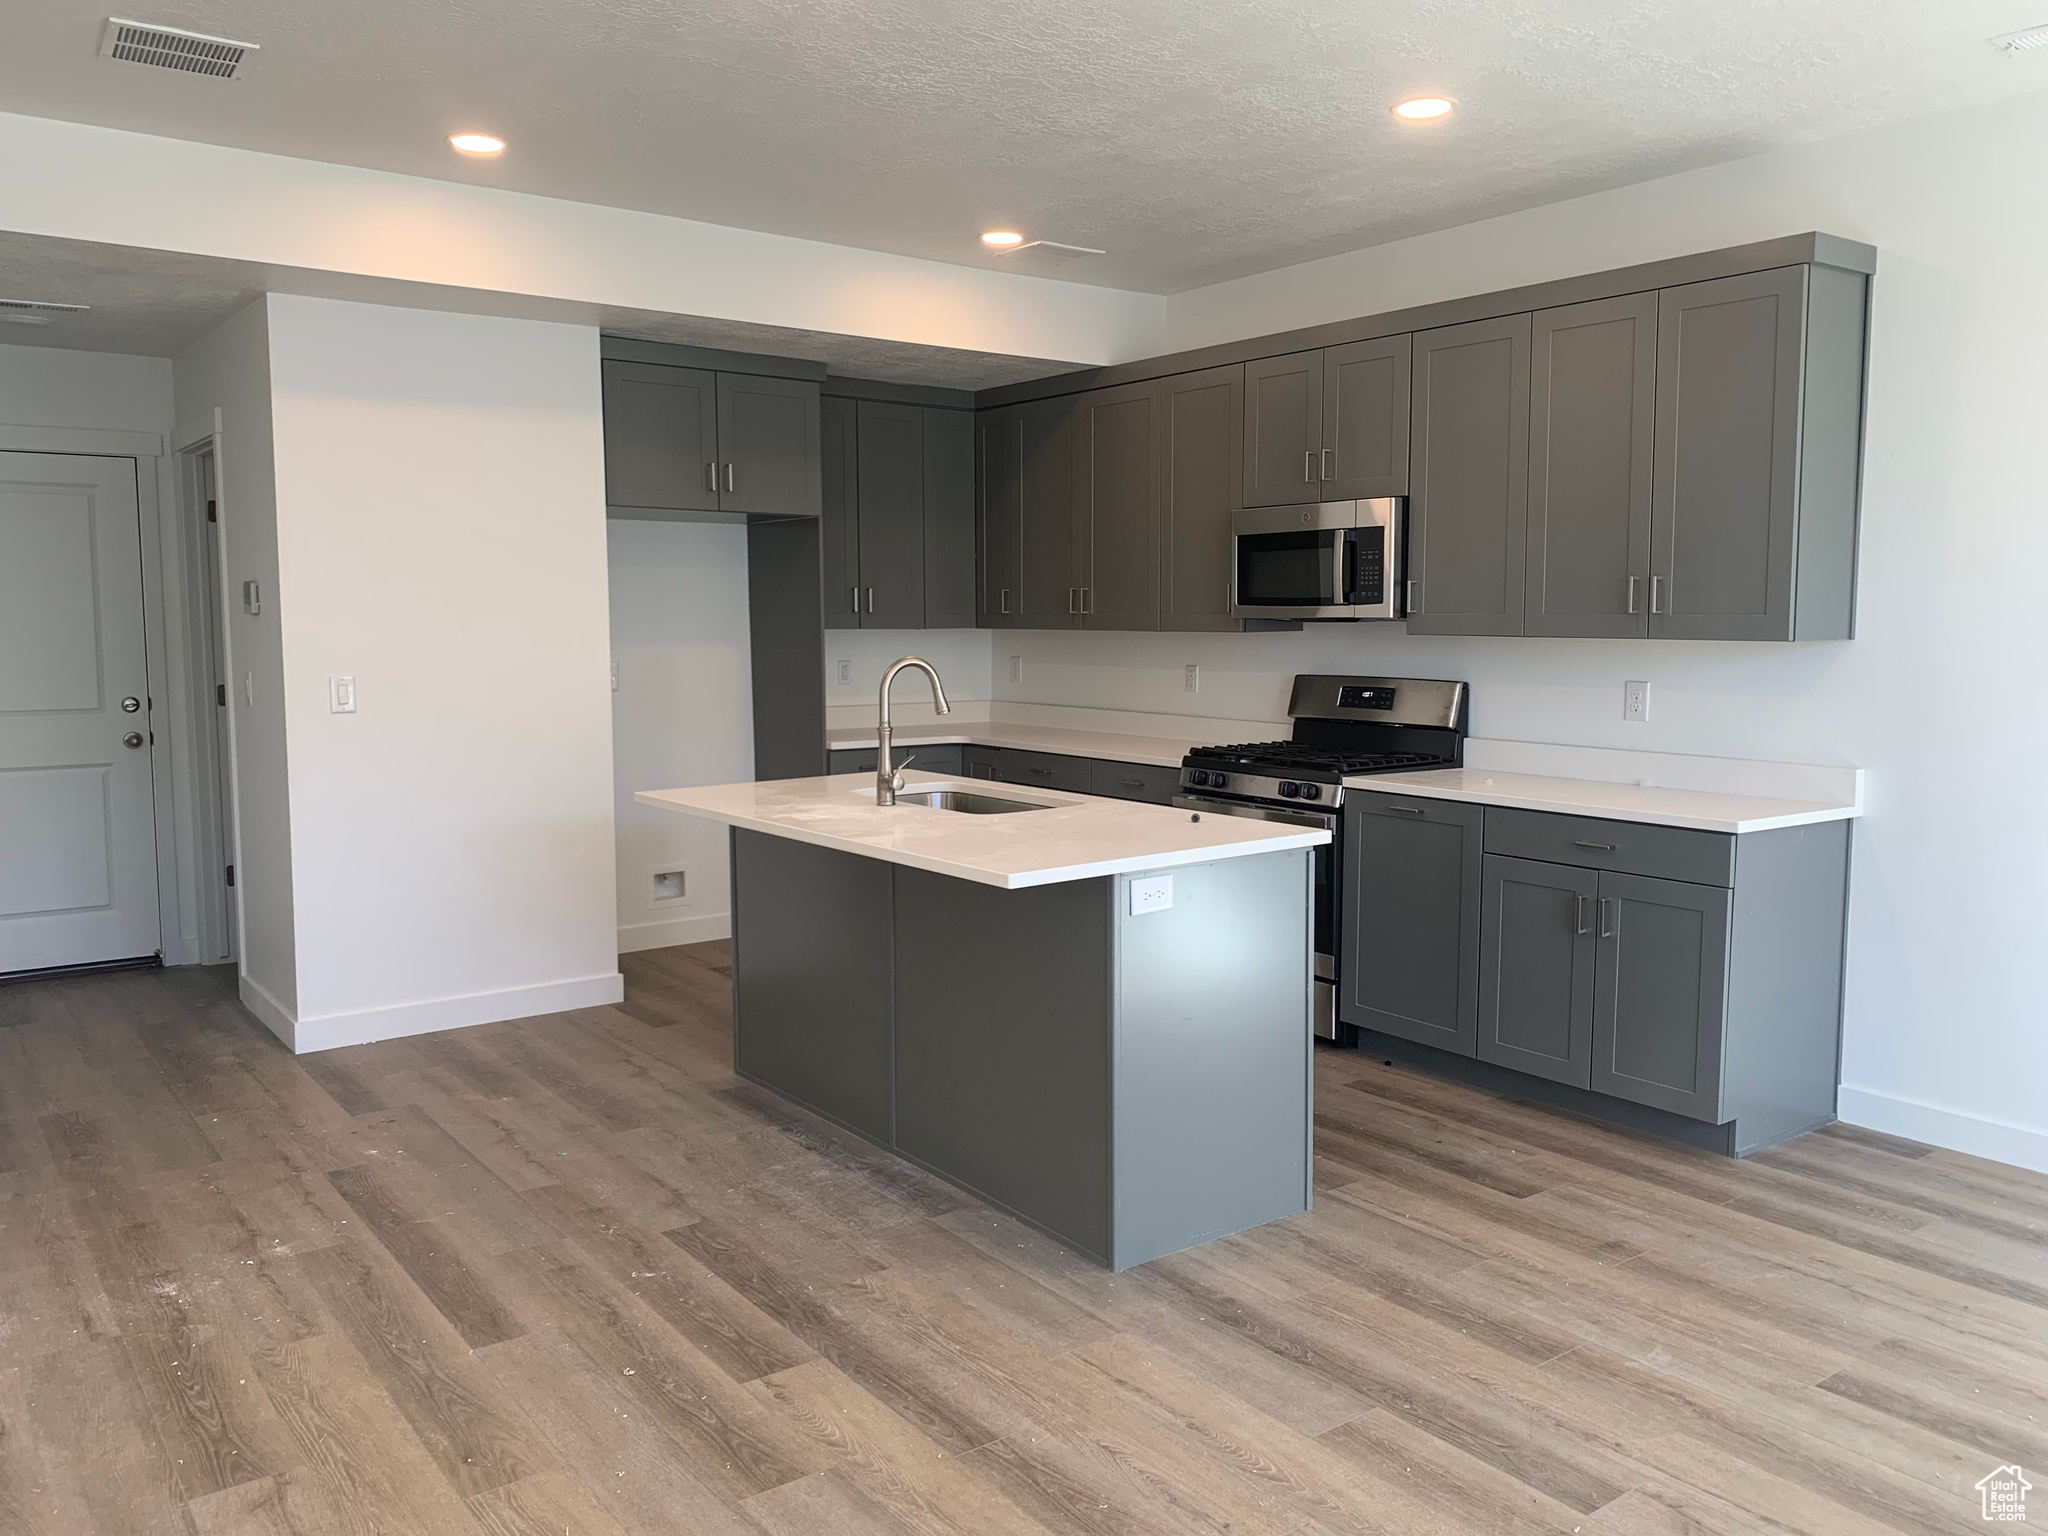 Kitchen with gray cabinets, an island with sink, light hardwood / wood-style floors, and appliances with stainless steel finishes